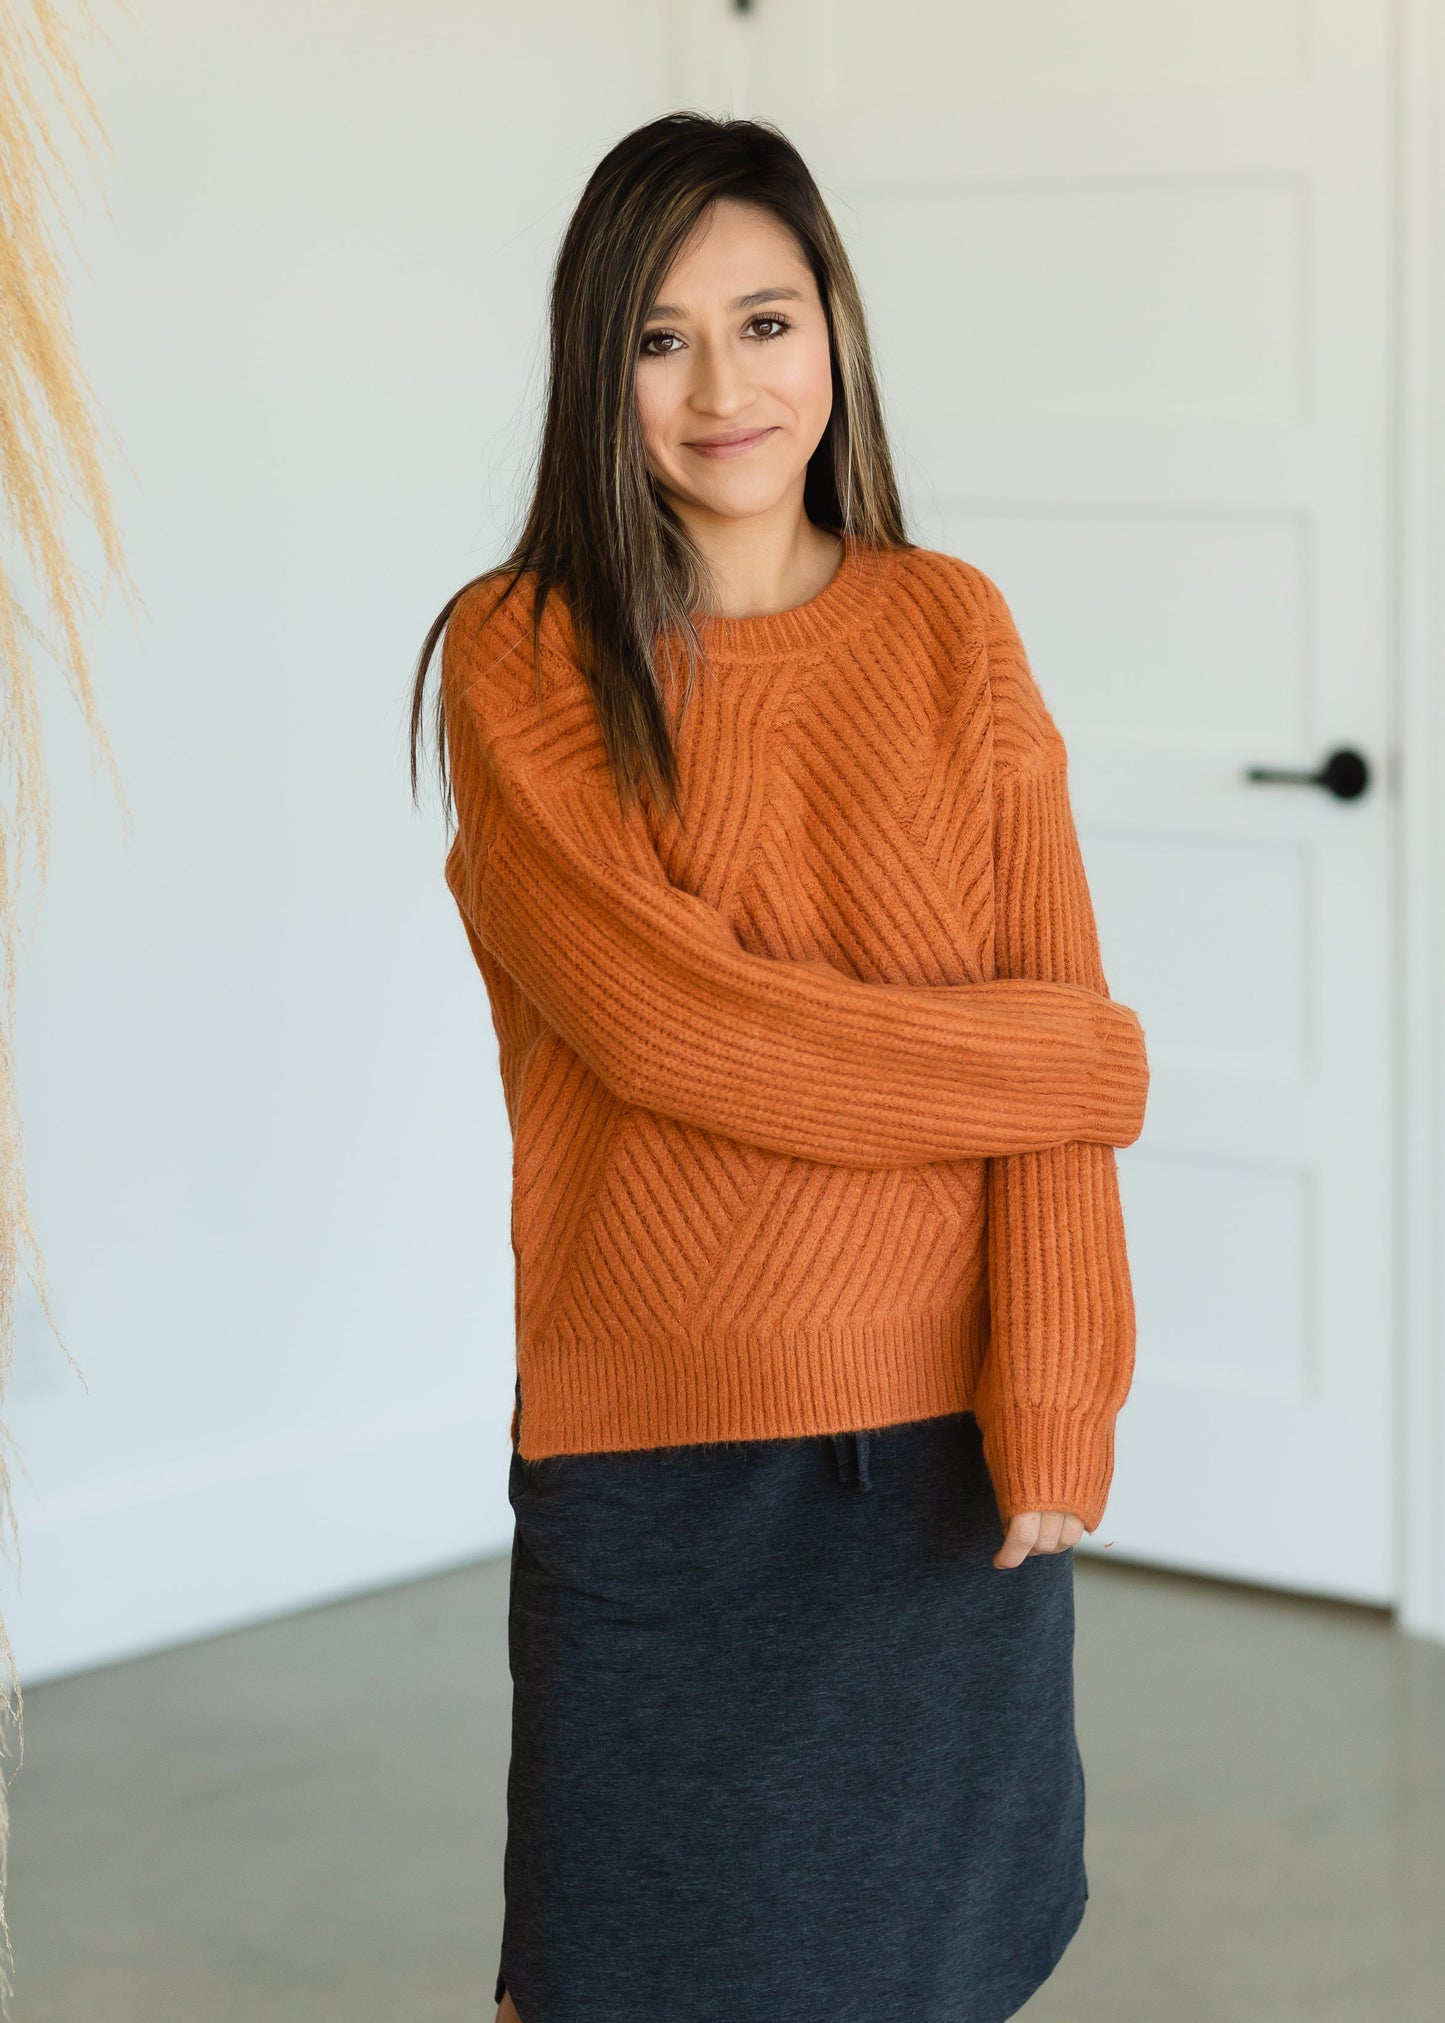 Bonnie Toffee Woven Sweater - FINAL SALE Tops